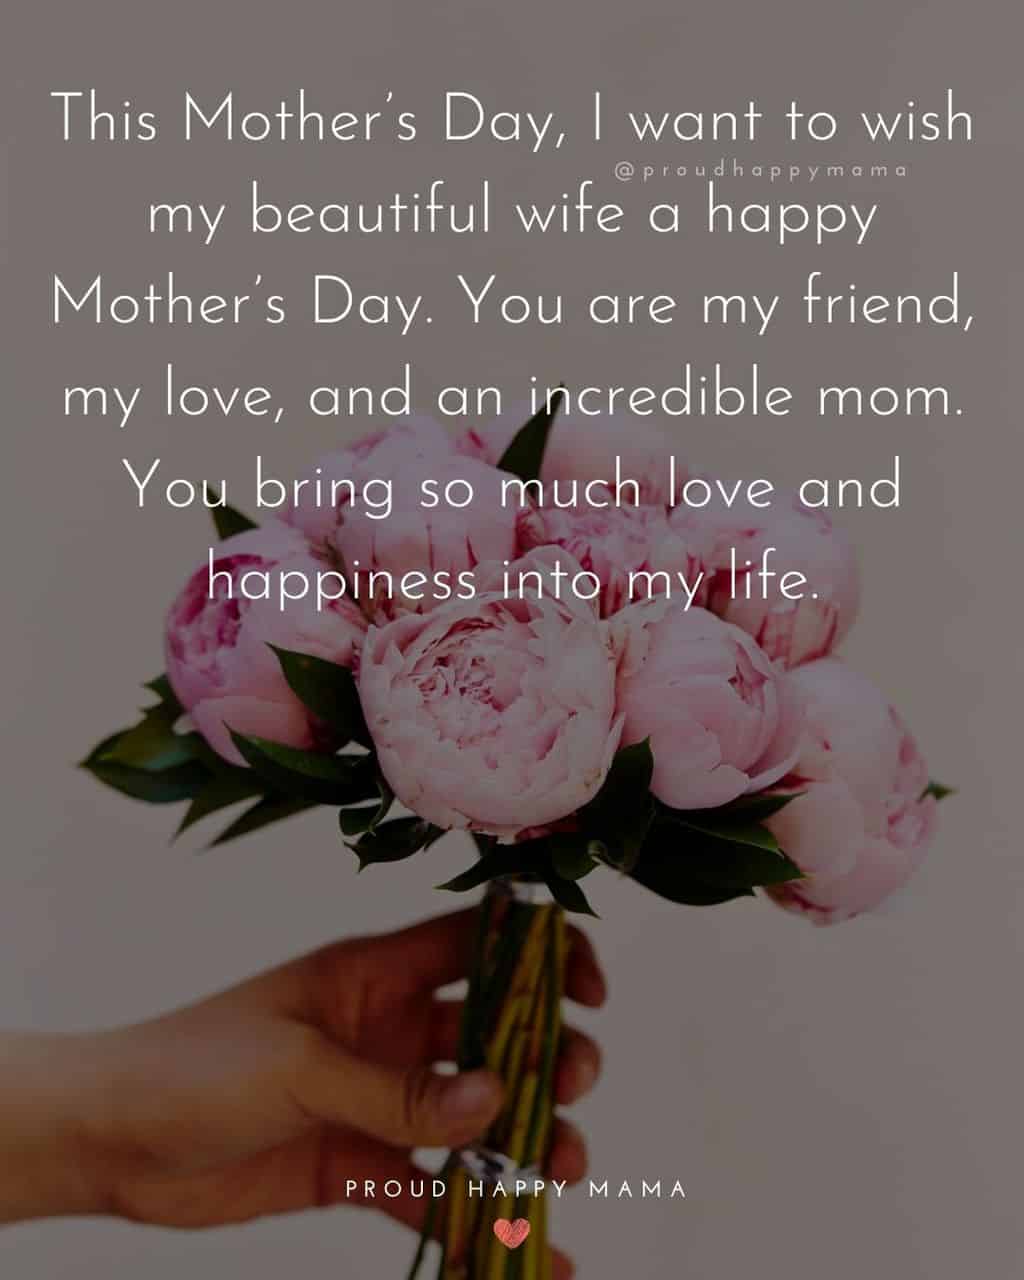 Happy Mothers Day Quotes For Wife - This Mother’s Day, I want to wish my beautiful wife a happy Mother’s Day. You are my 